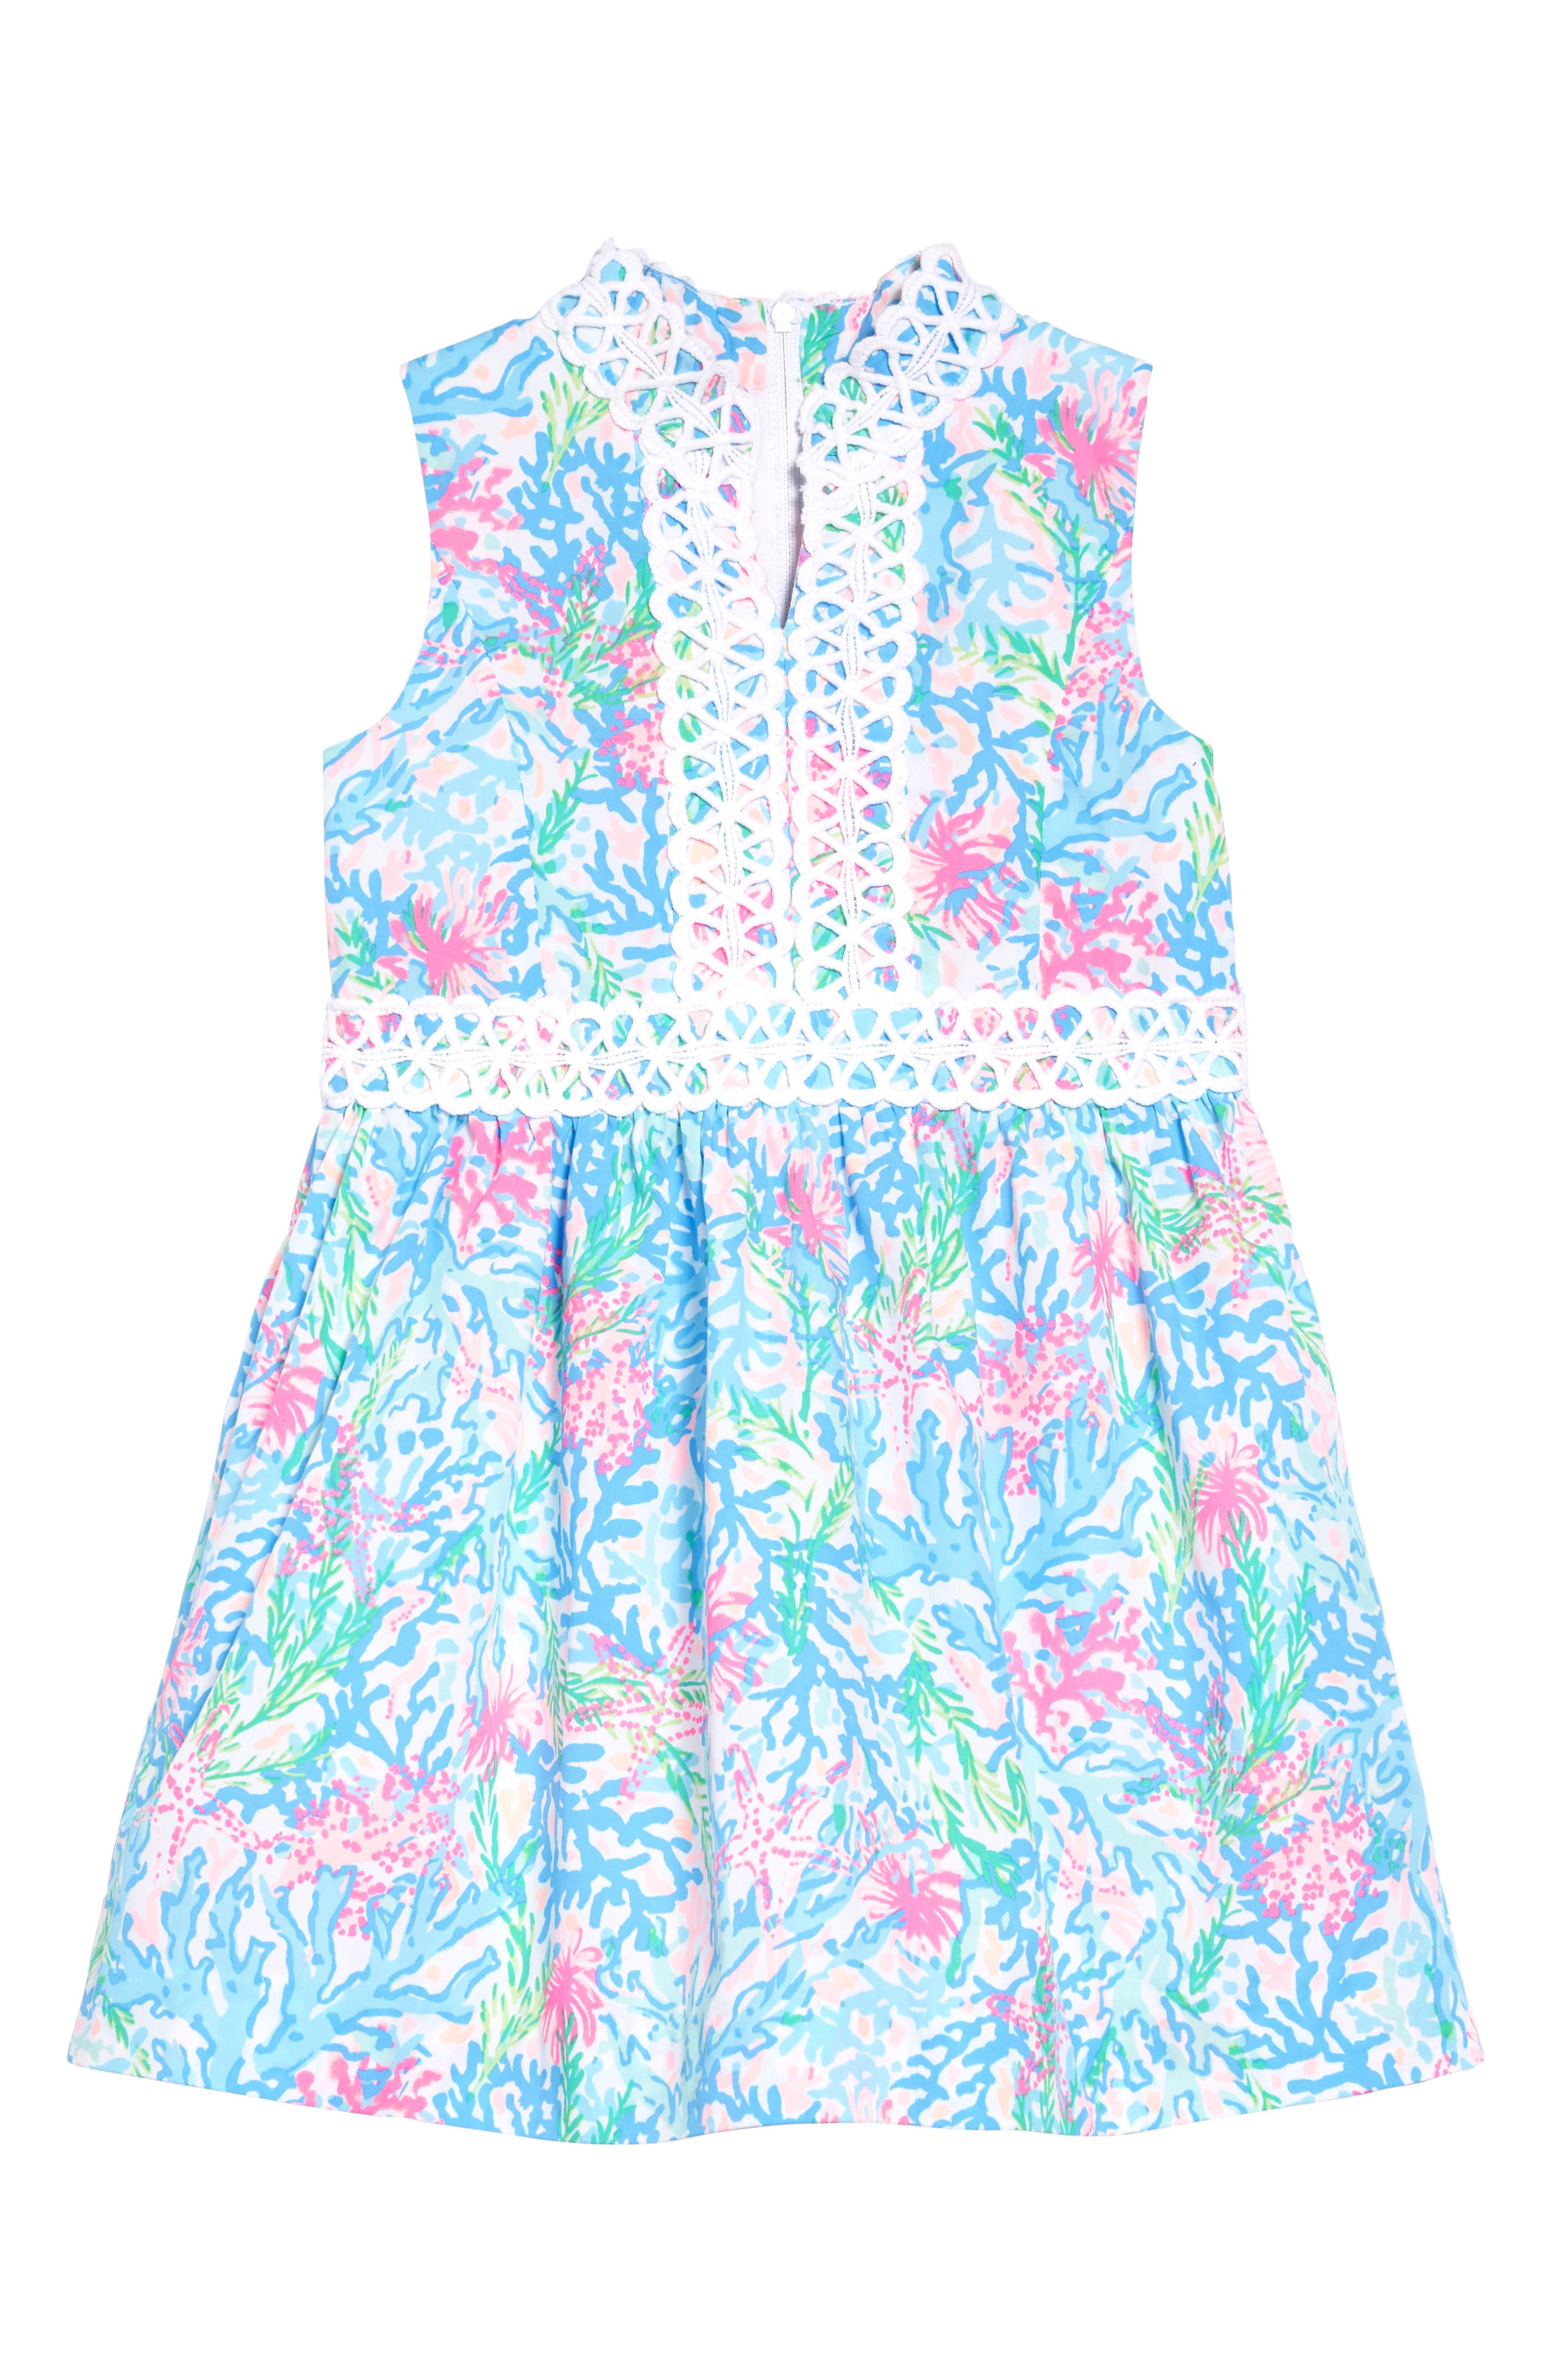 lilly girl clothes